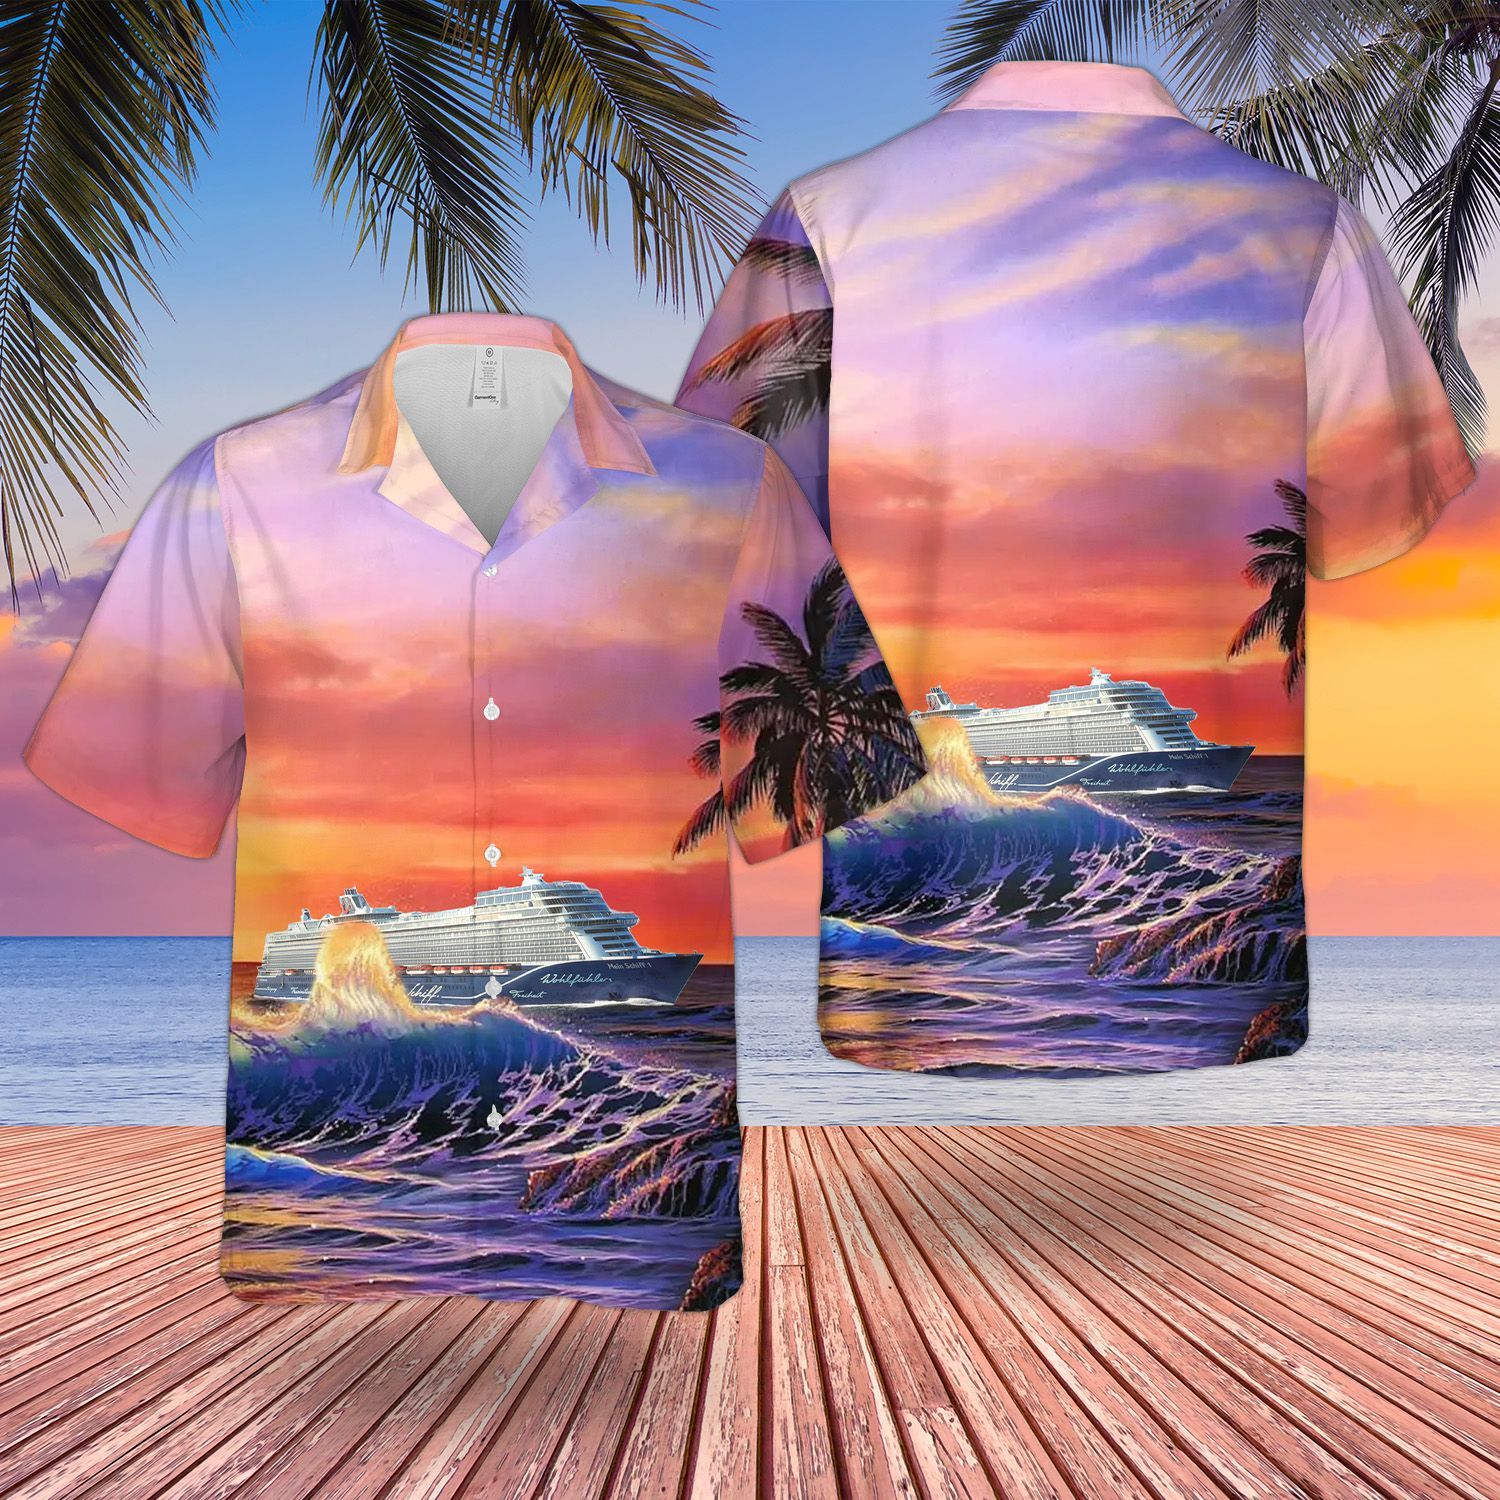 Find yourself a great beachwear here 415